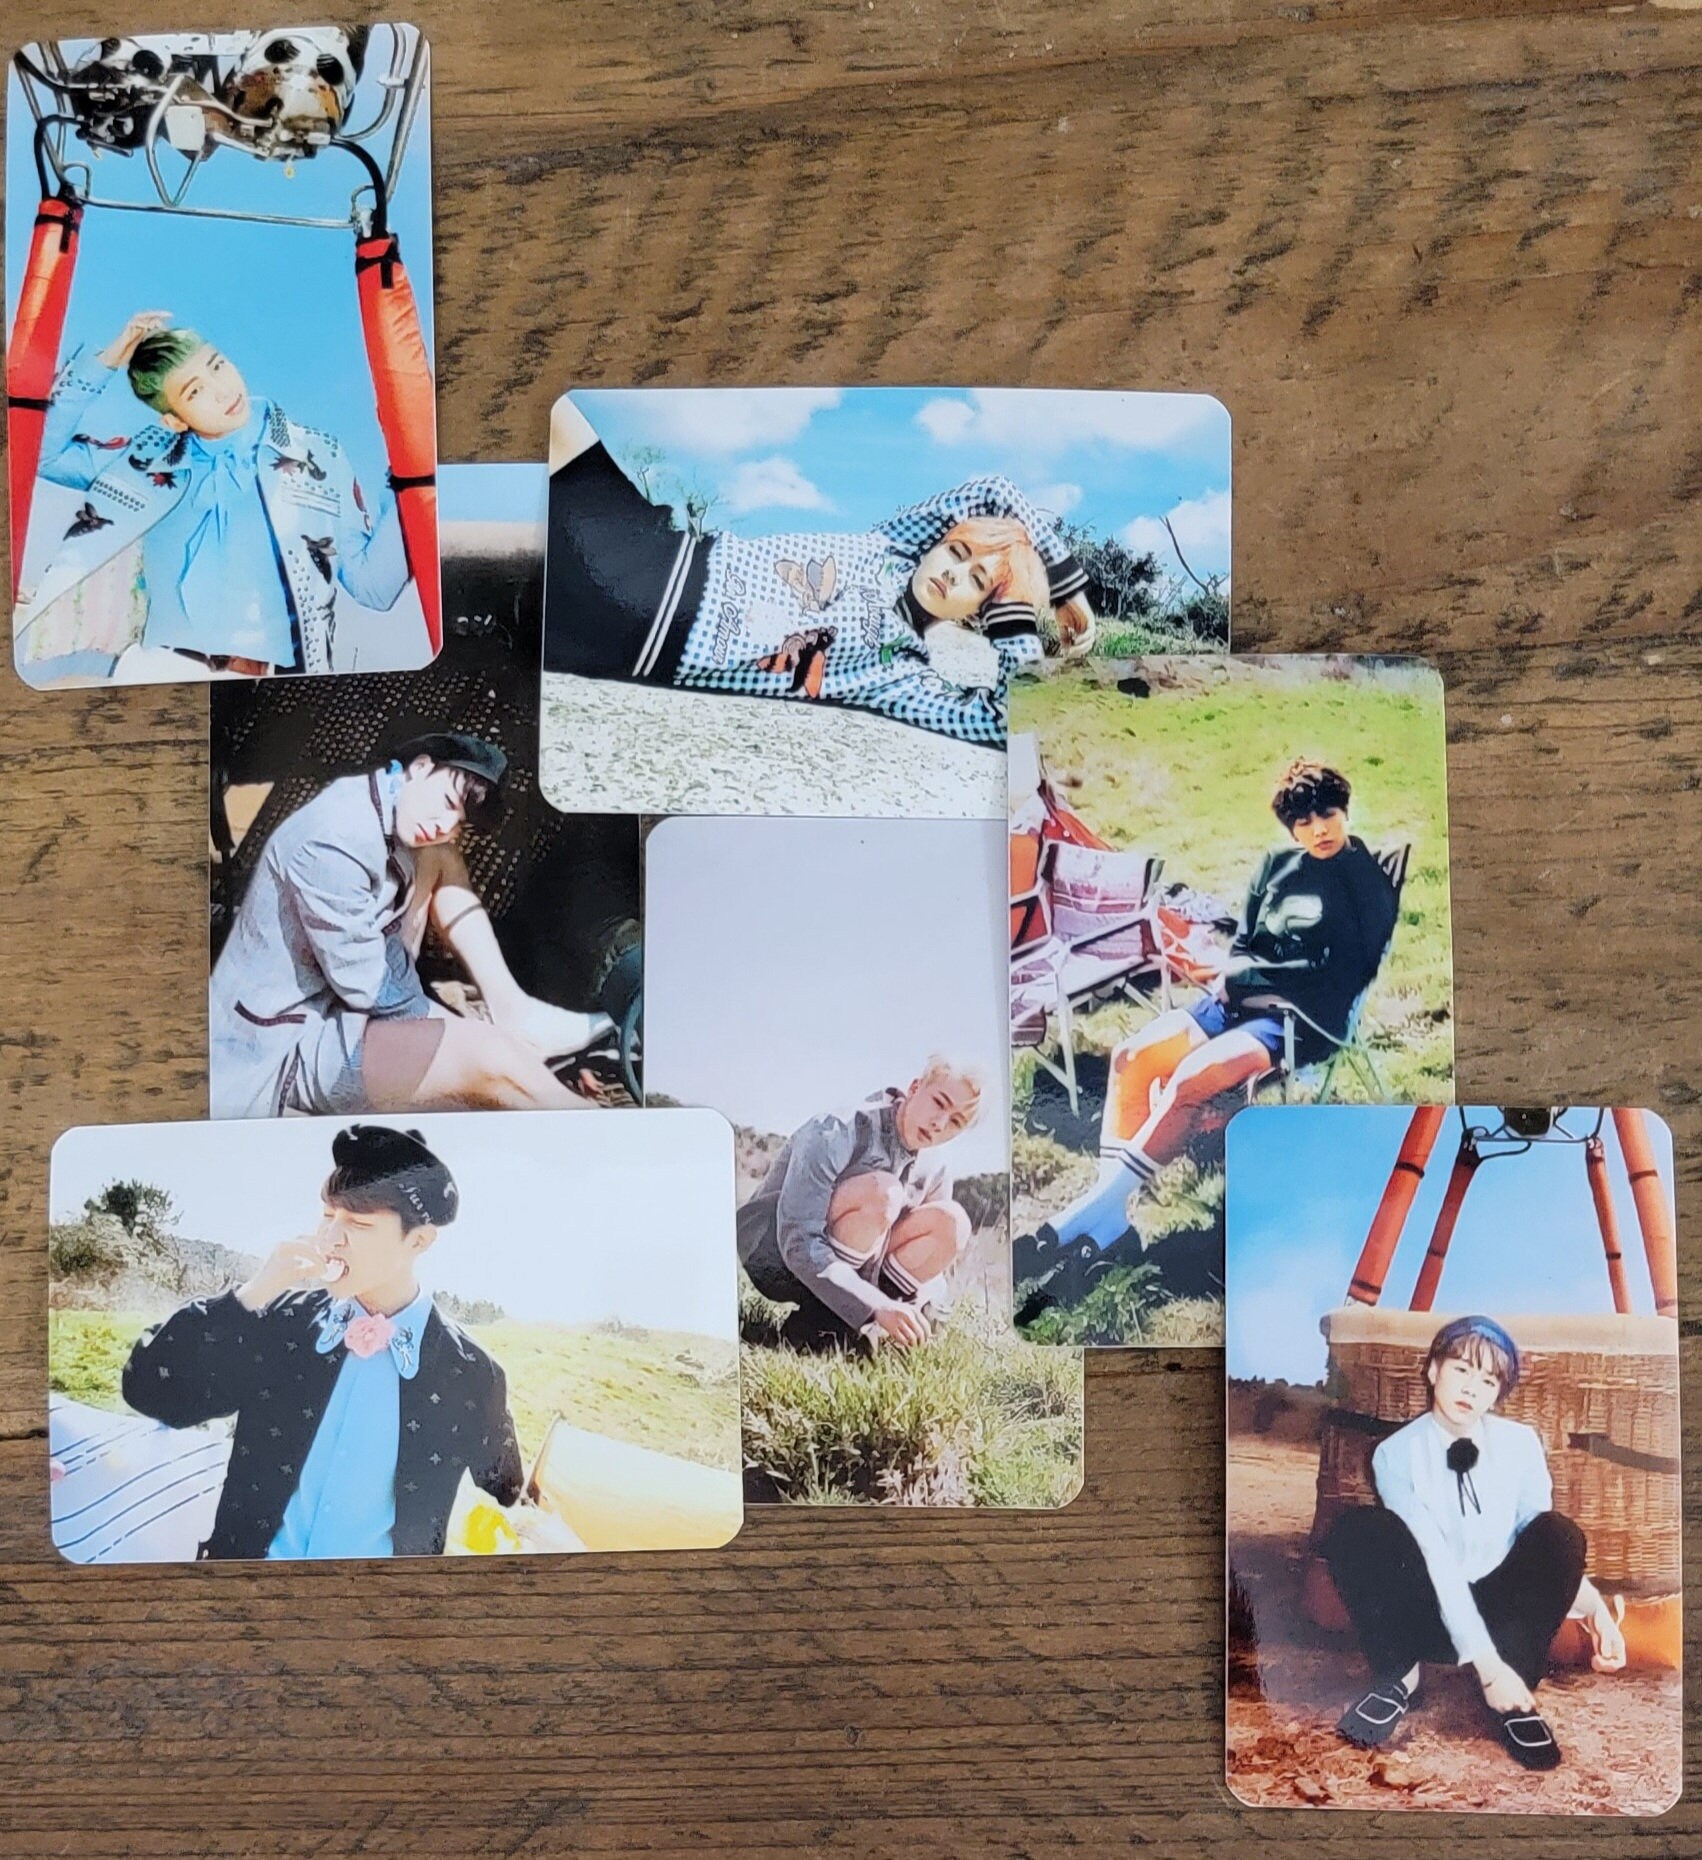 BTS Young Forever Taiwan Photo Cards extremely RARE - Etsy